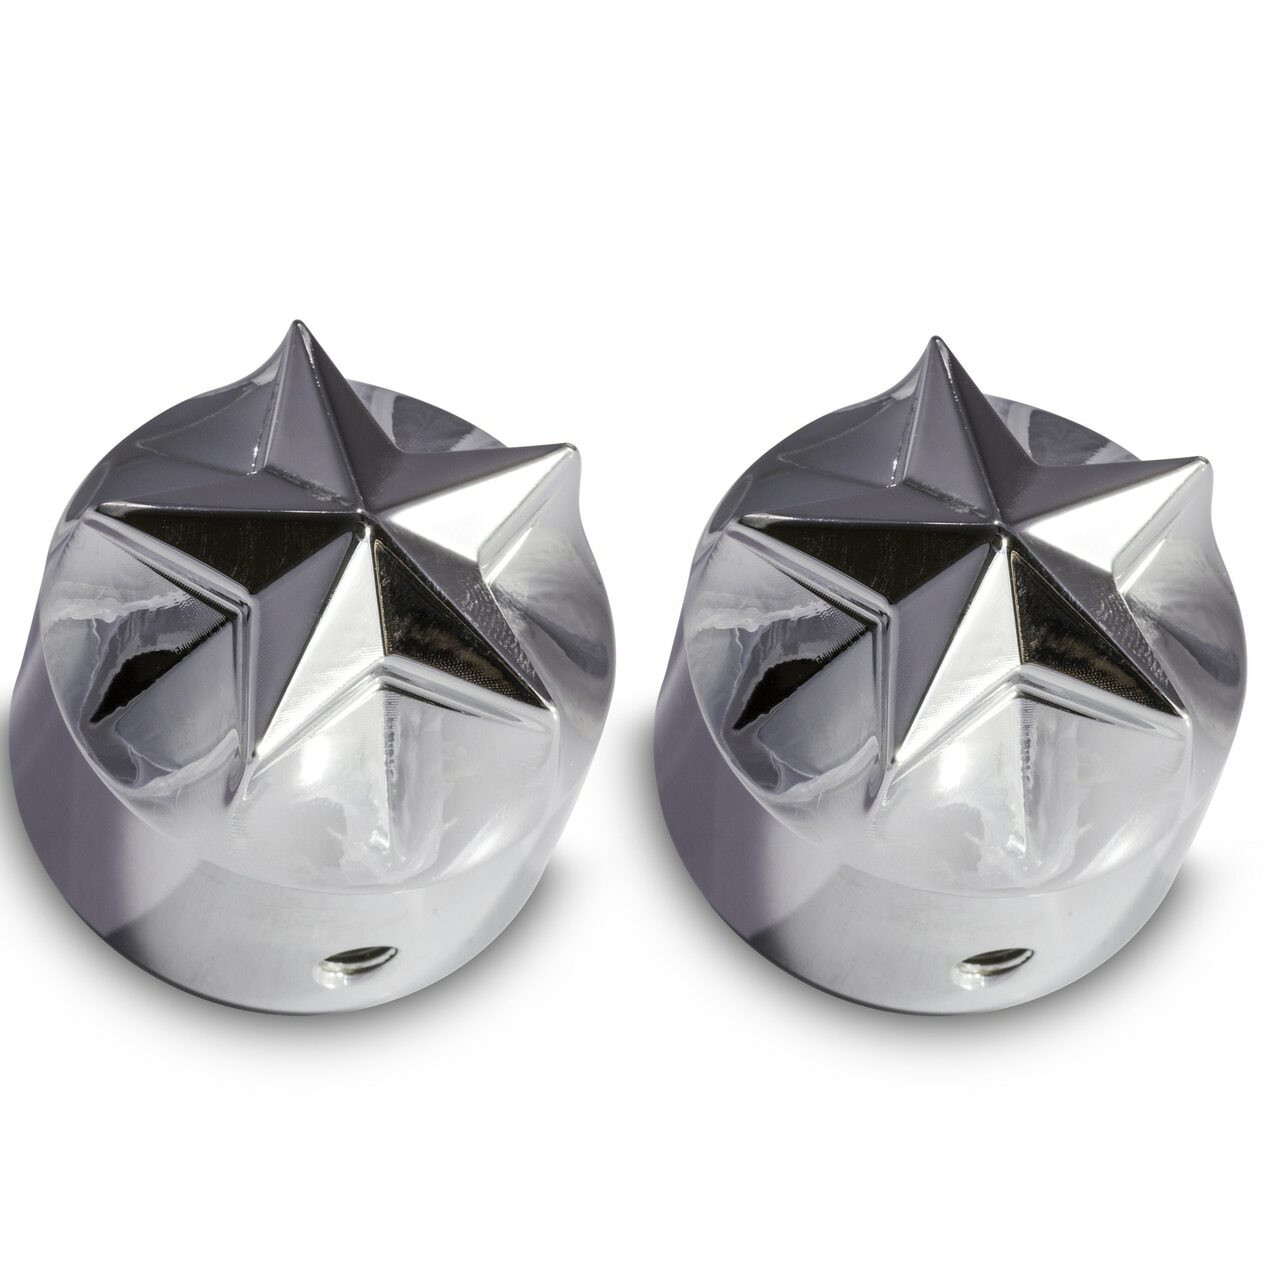 Chrome Starl Harley Davidson Road Glide front axle covers